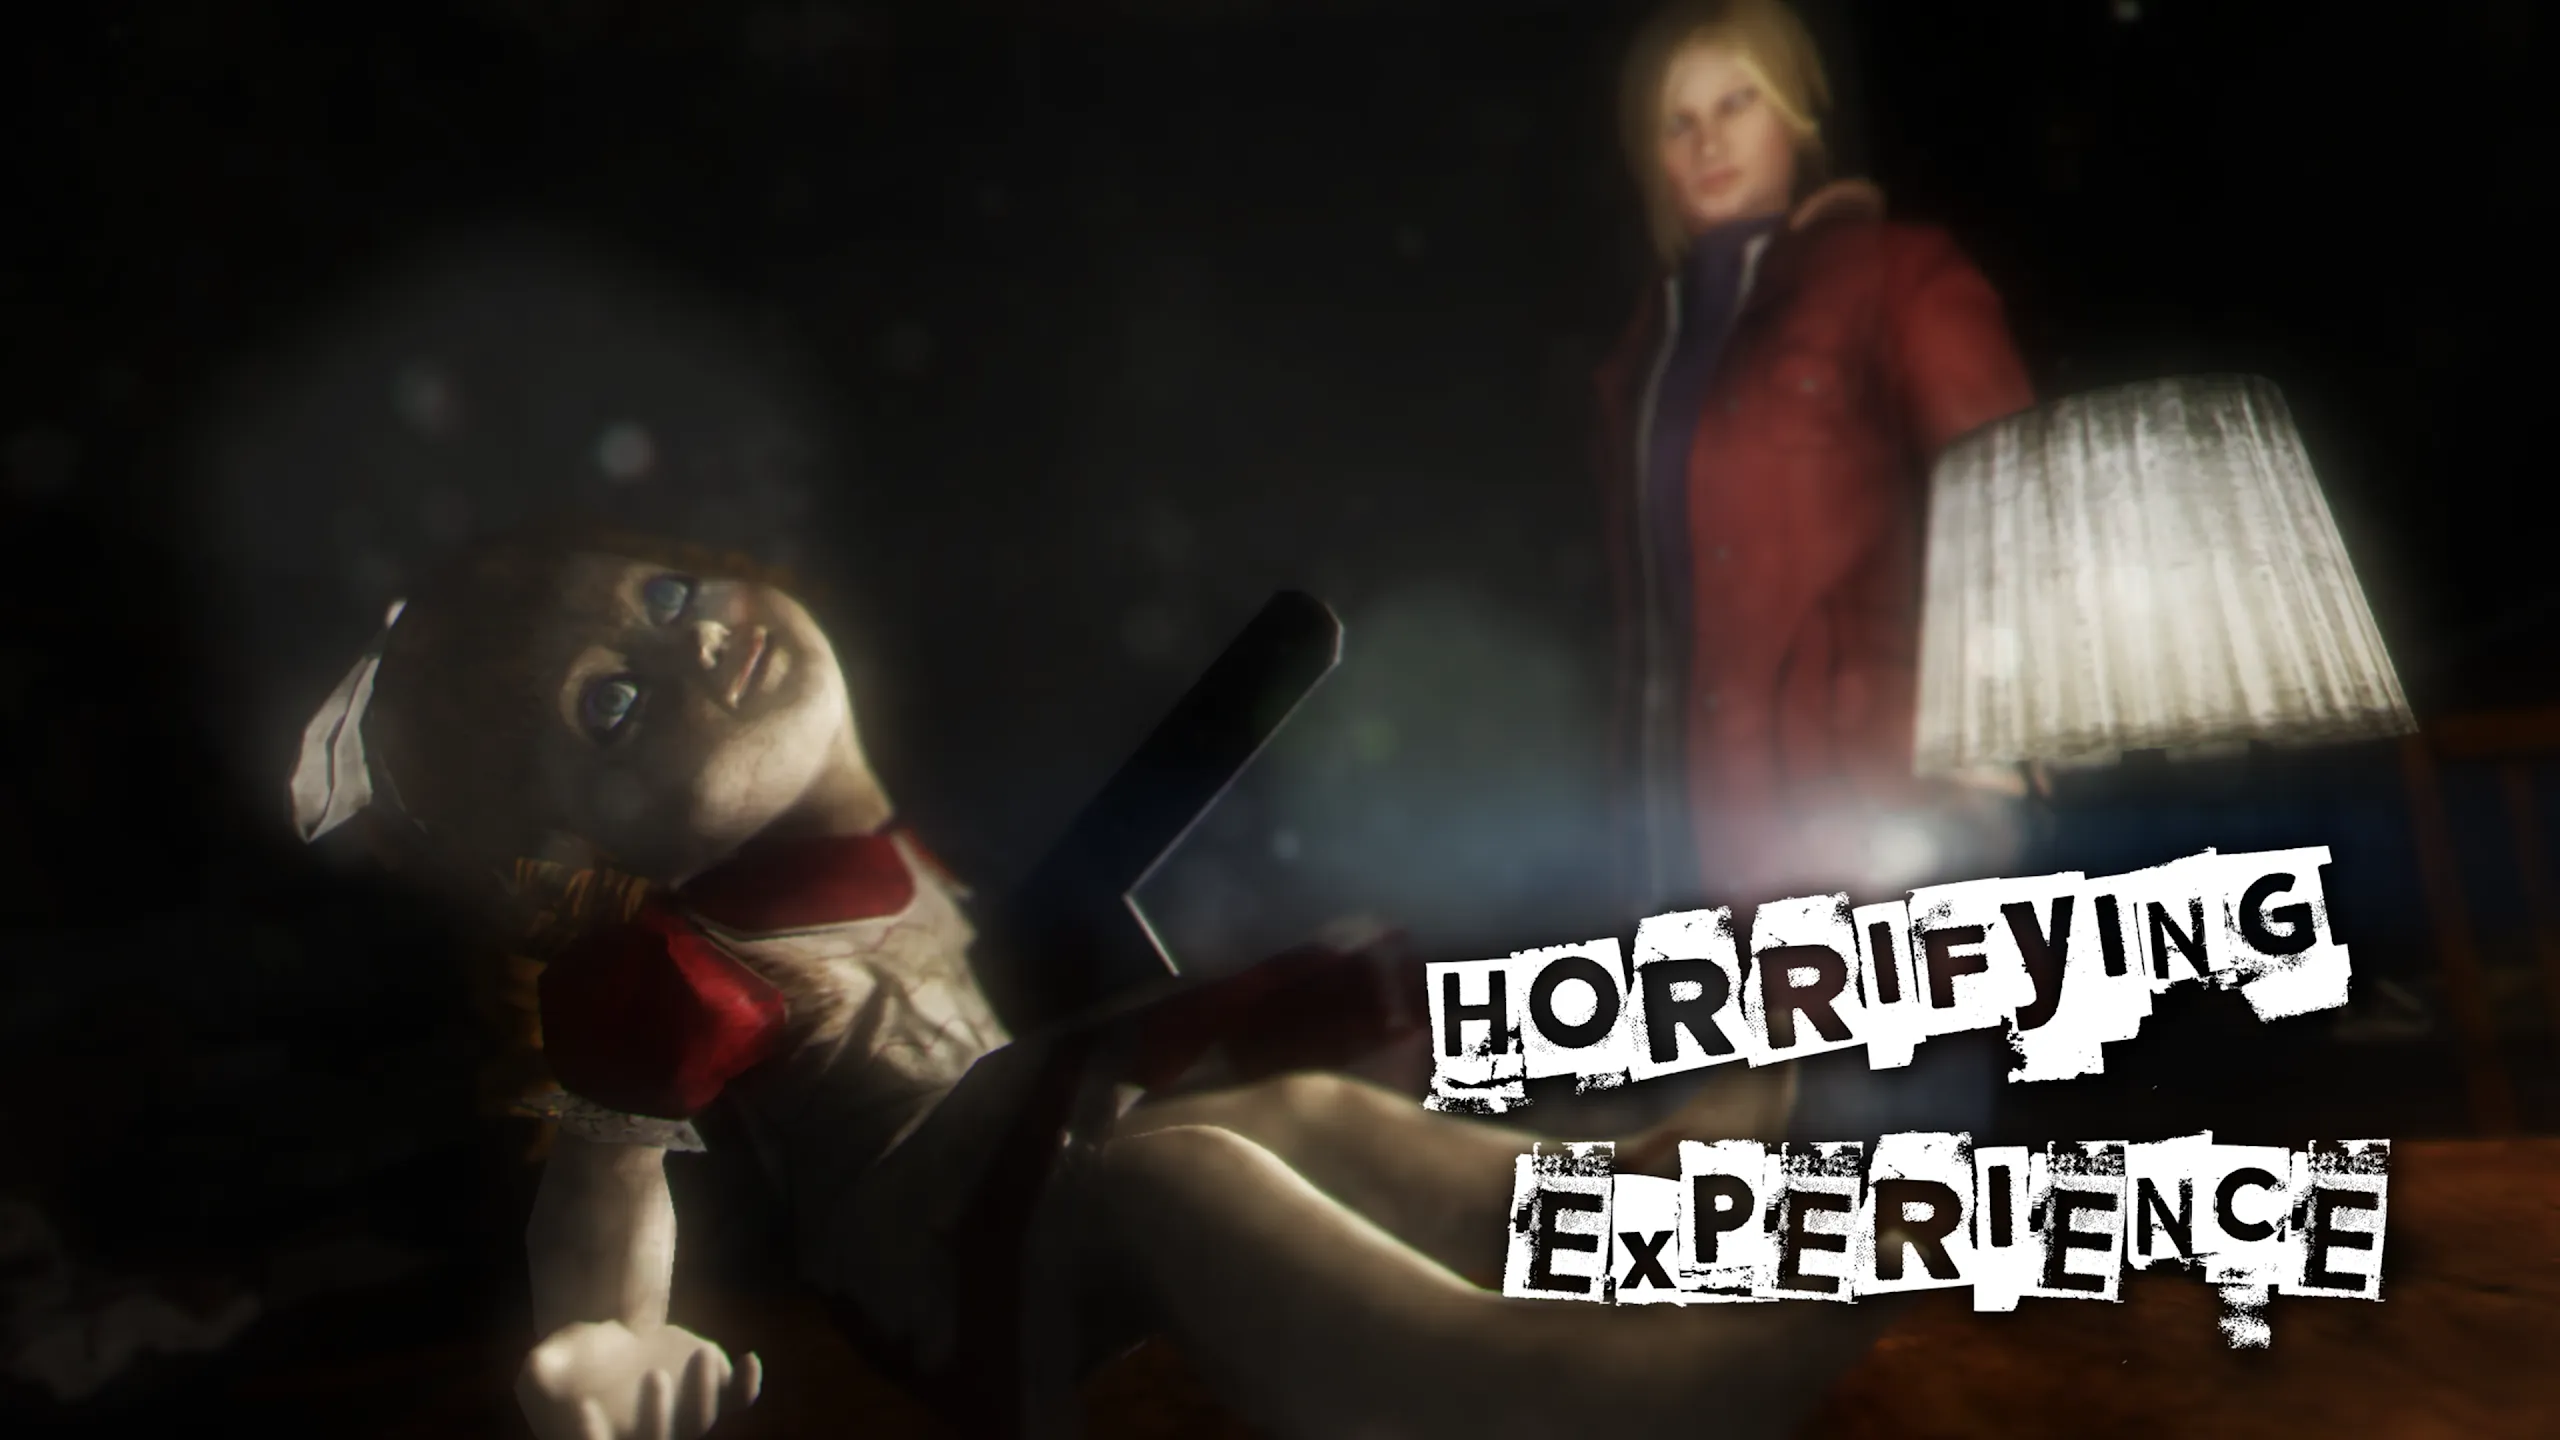 Review: Forgotten Memories remembers what it means to be a survival horror  game